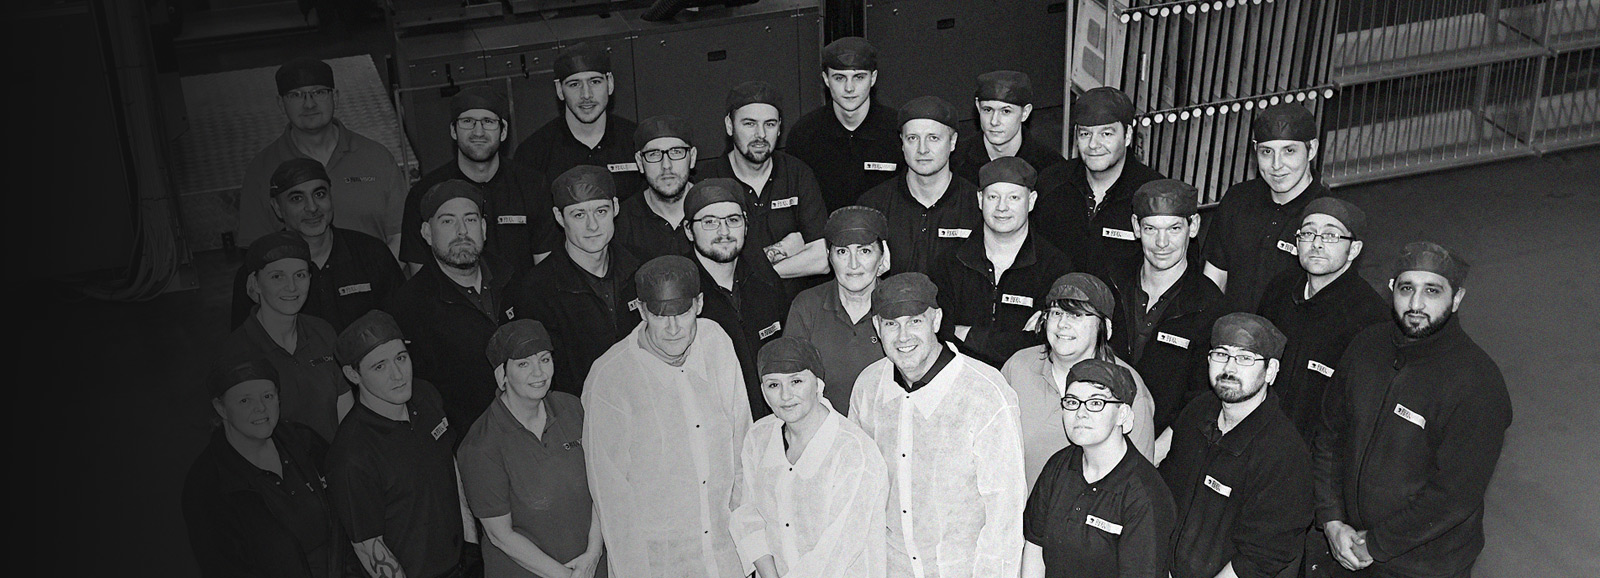 Large group of production employees stood together smiling at camera